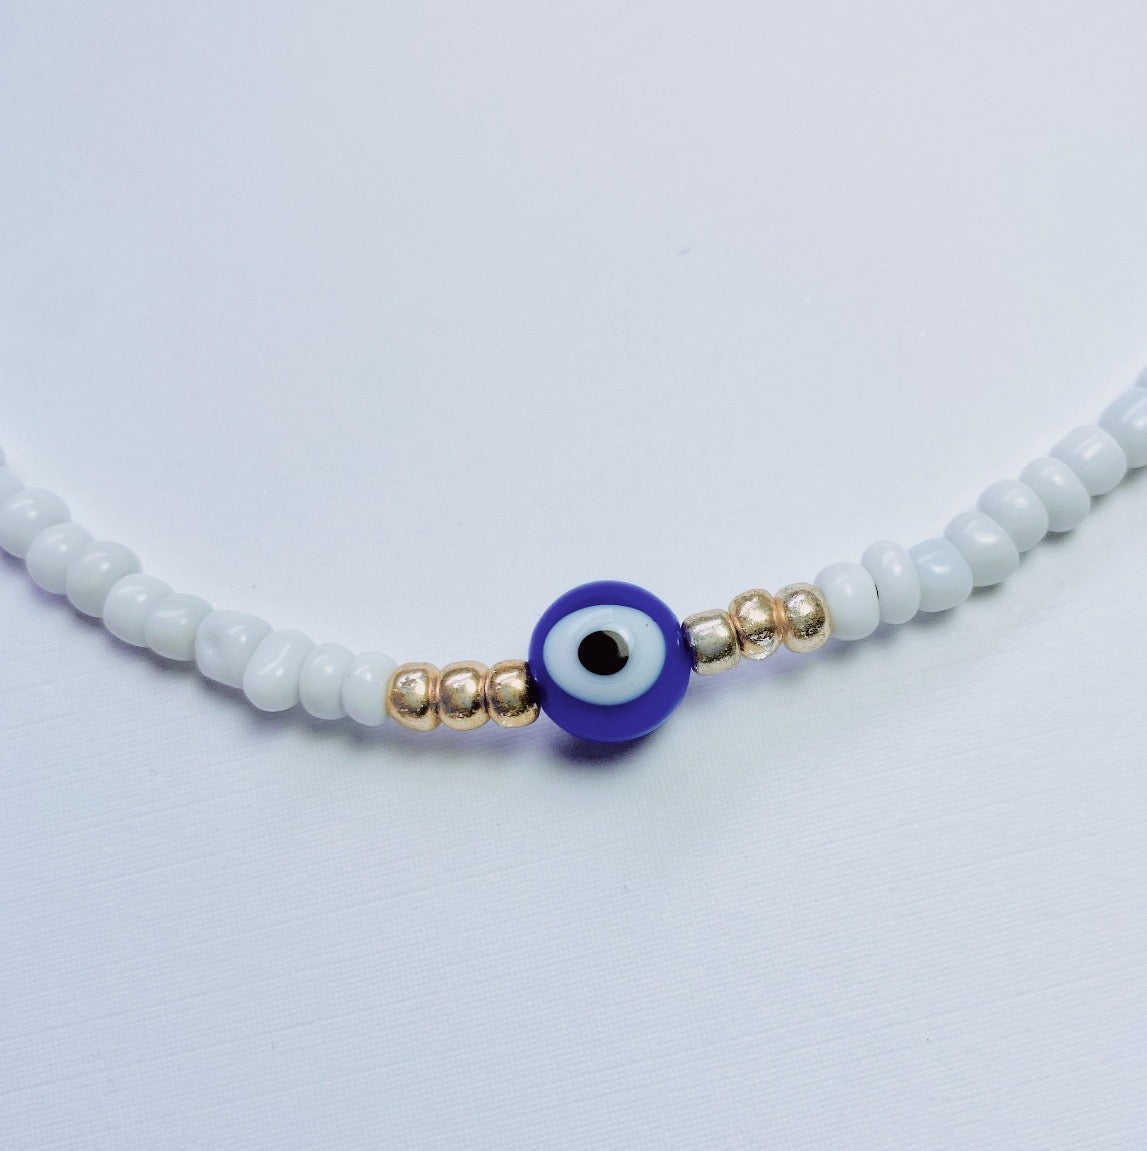 Buy 8mm Dark Blue Evil Eye Glass Beads Online. COD. Low Prices. Premium  Quality. Free Shipping.